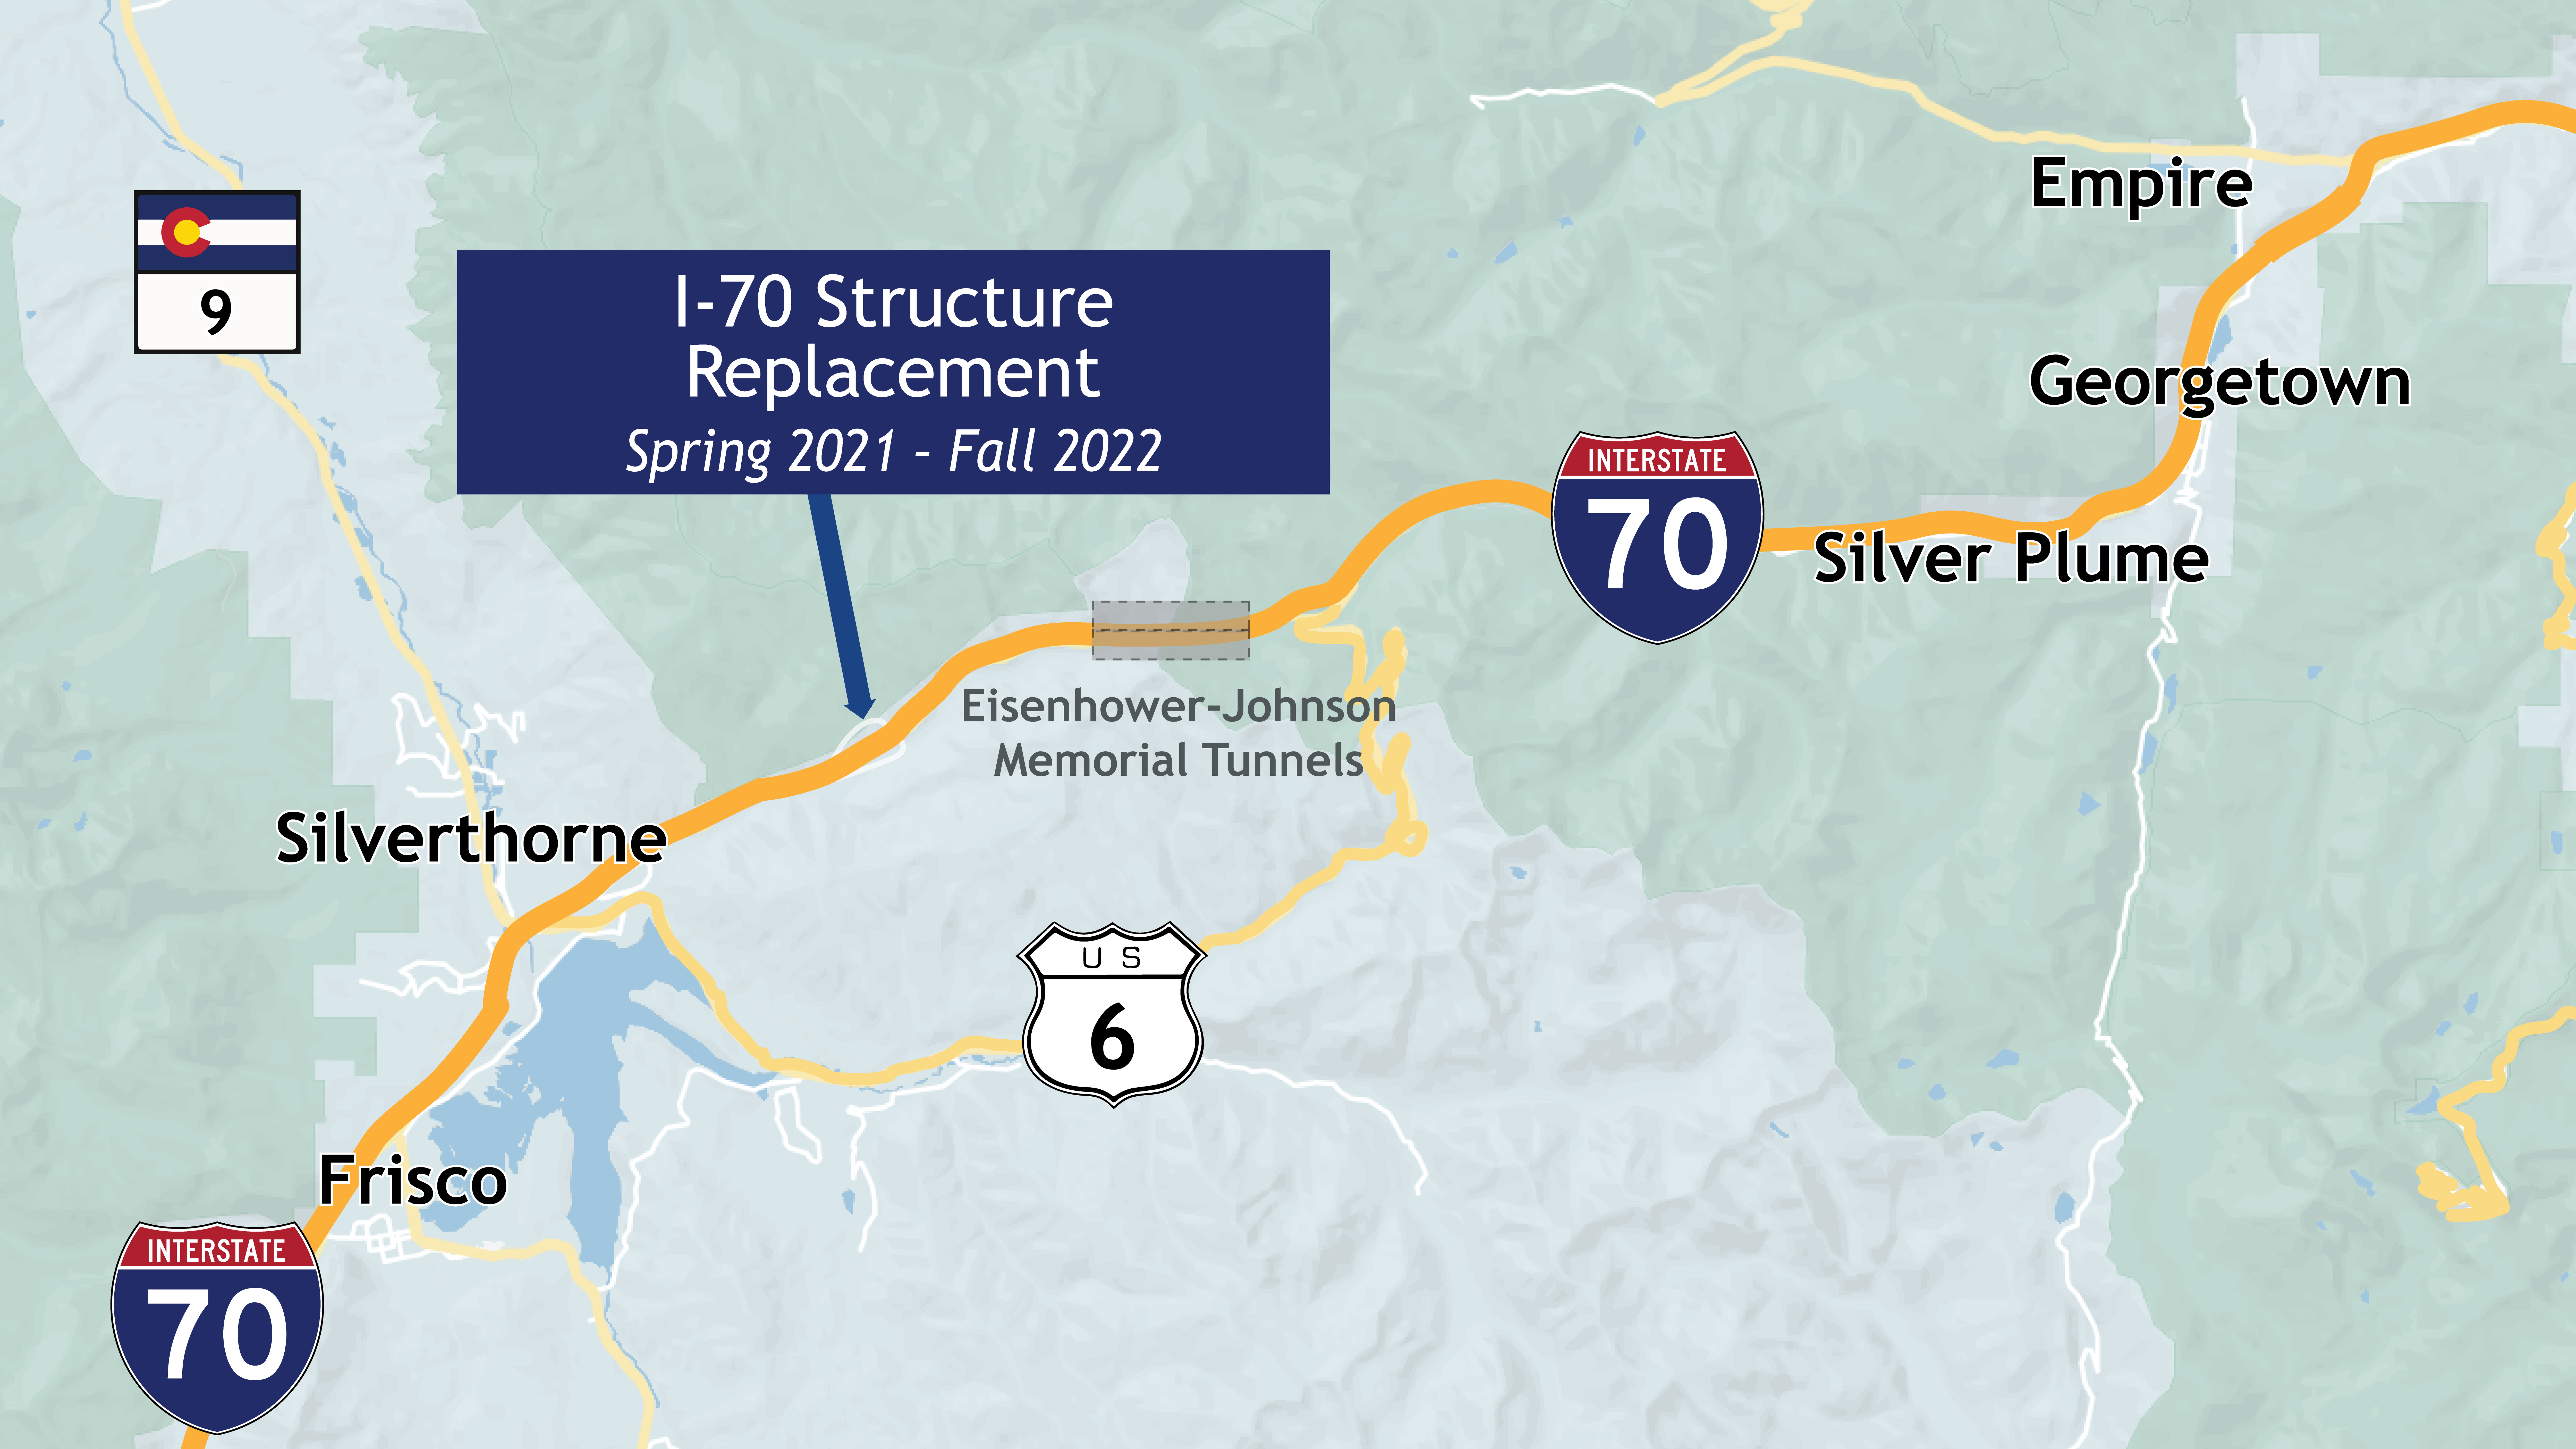 I-70 Structure Replacement-ProjectMaps 032421_v2.jpg detail image